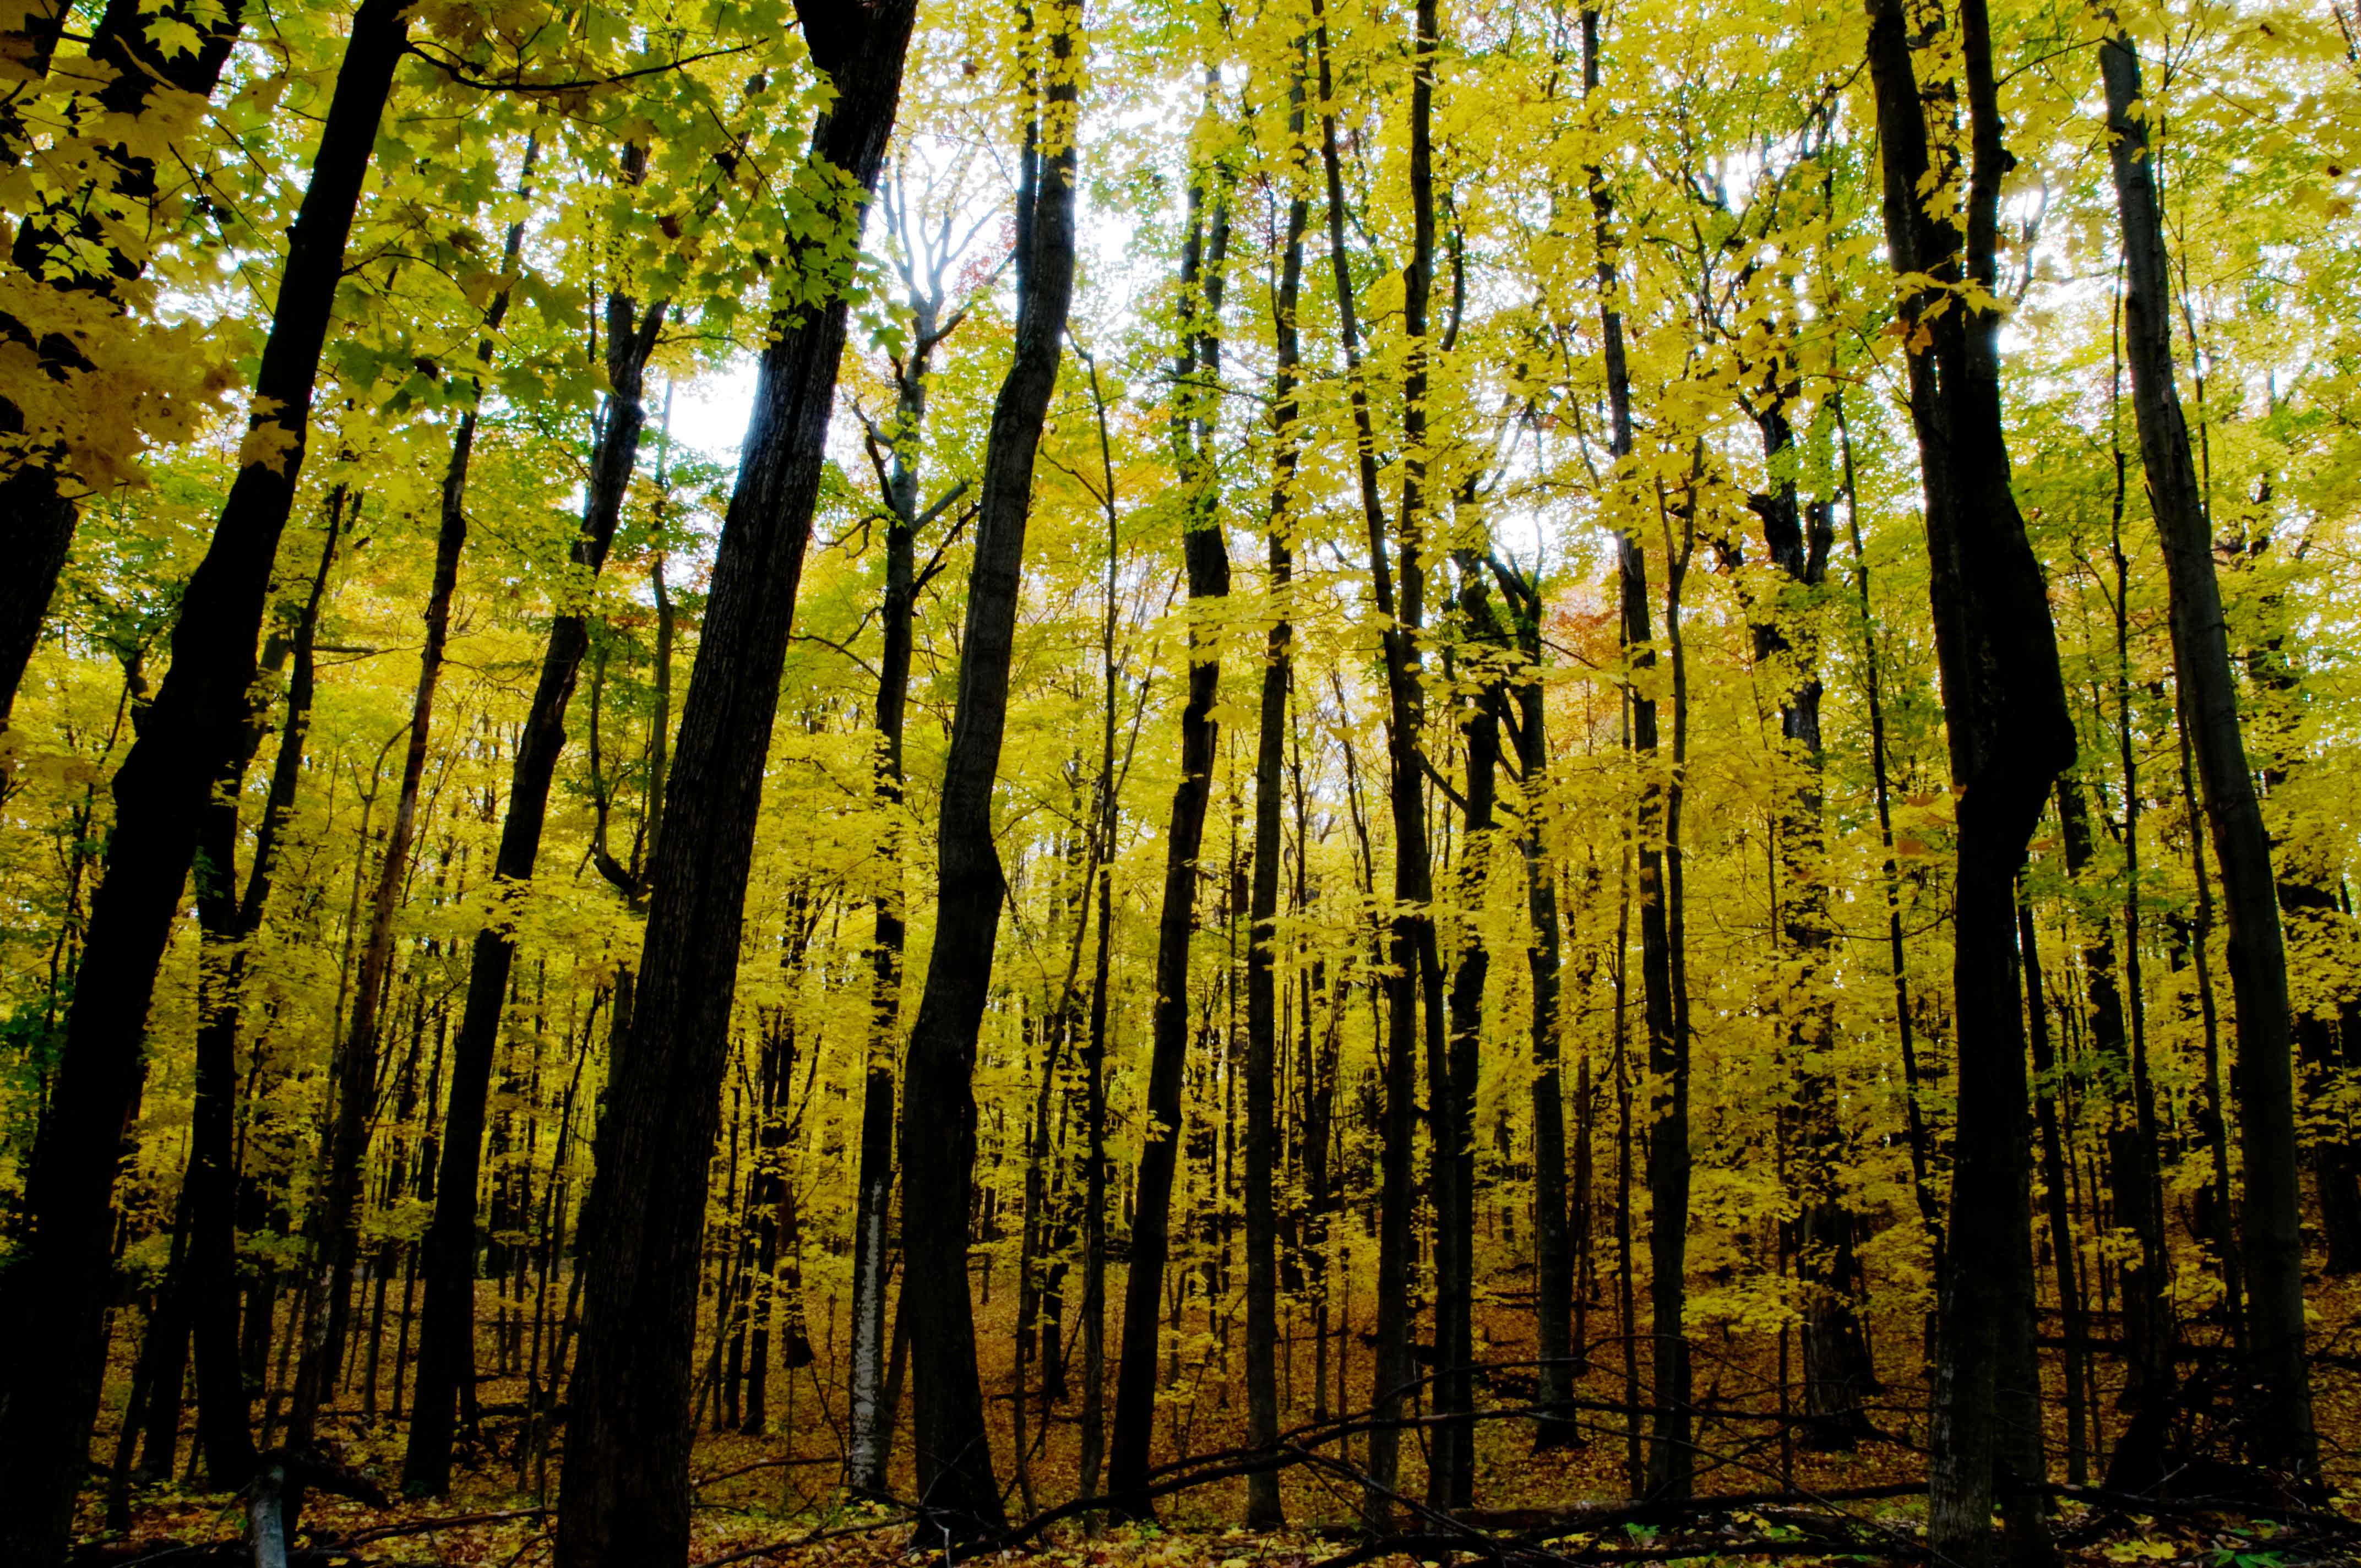 Trees with fall colors in the forest at Hartwick Pines State Park, Michigan